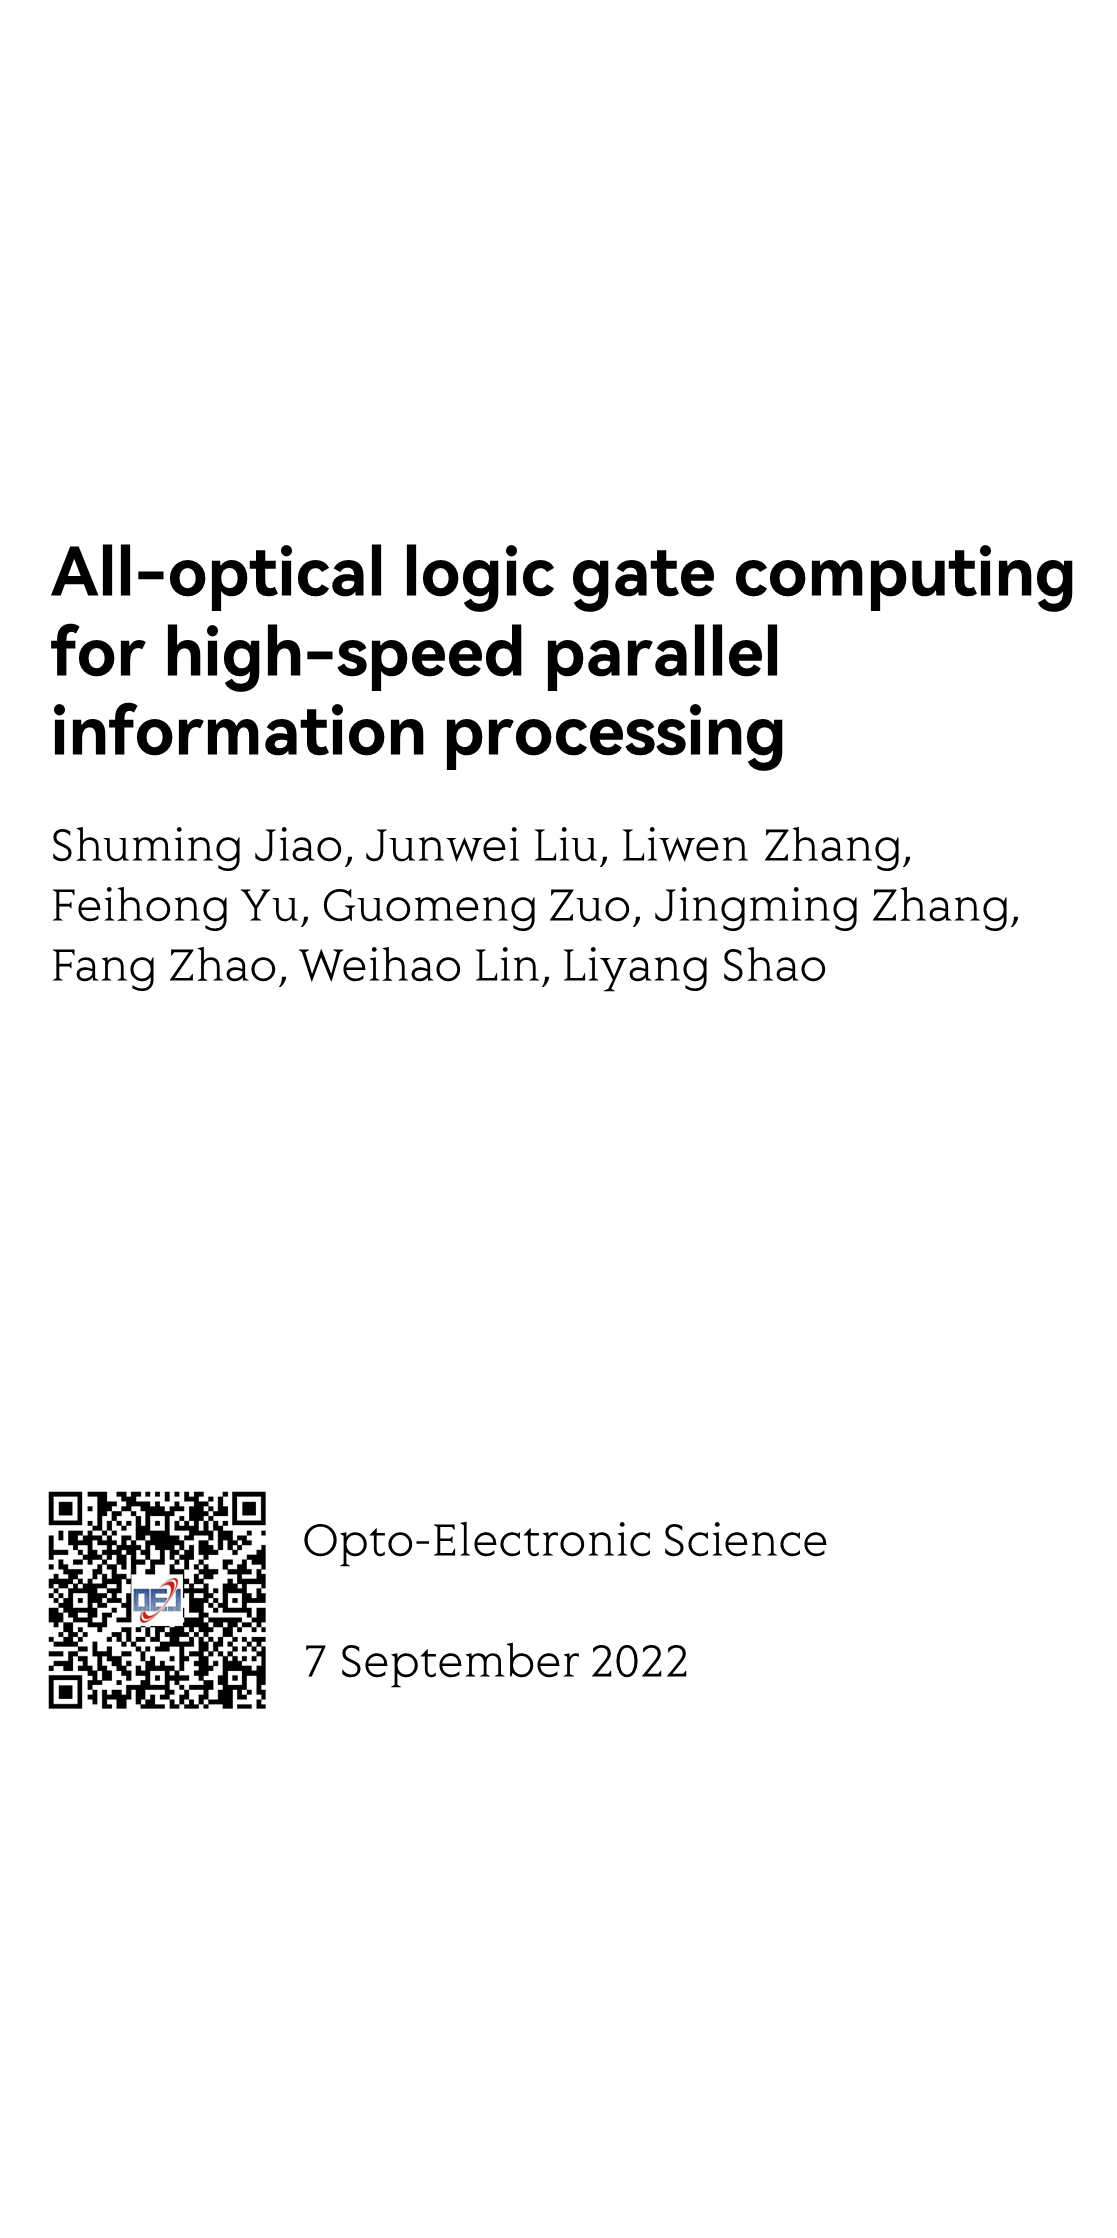 All-optical logic gate computing for high-speed parallel information processing_1